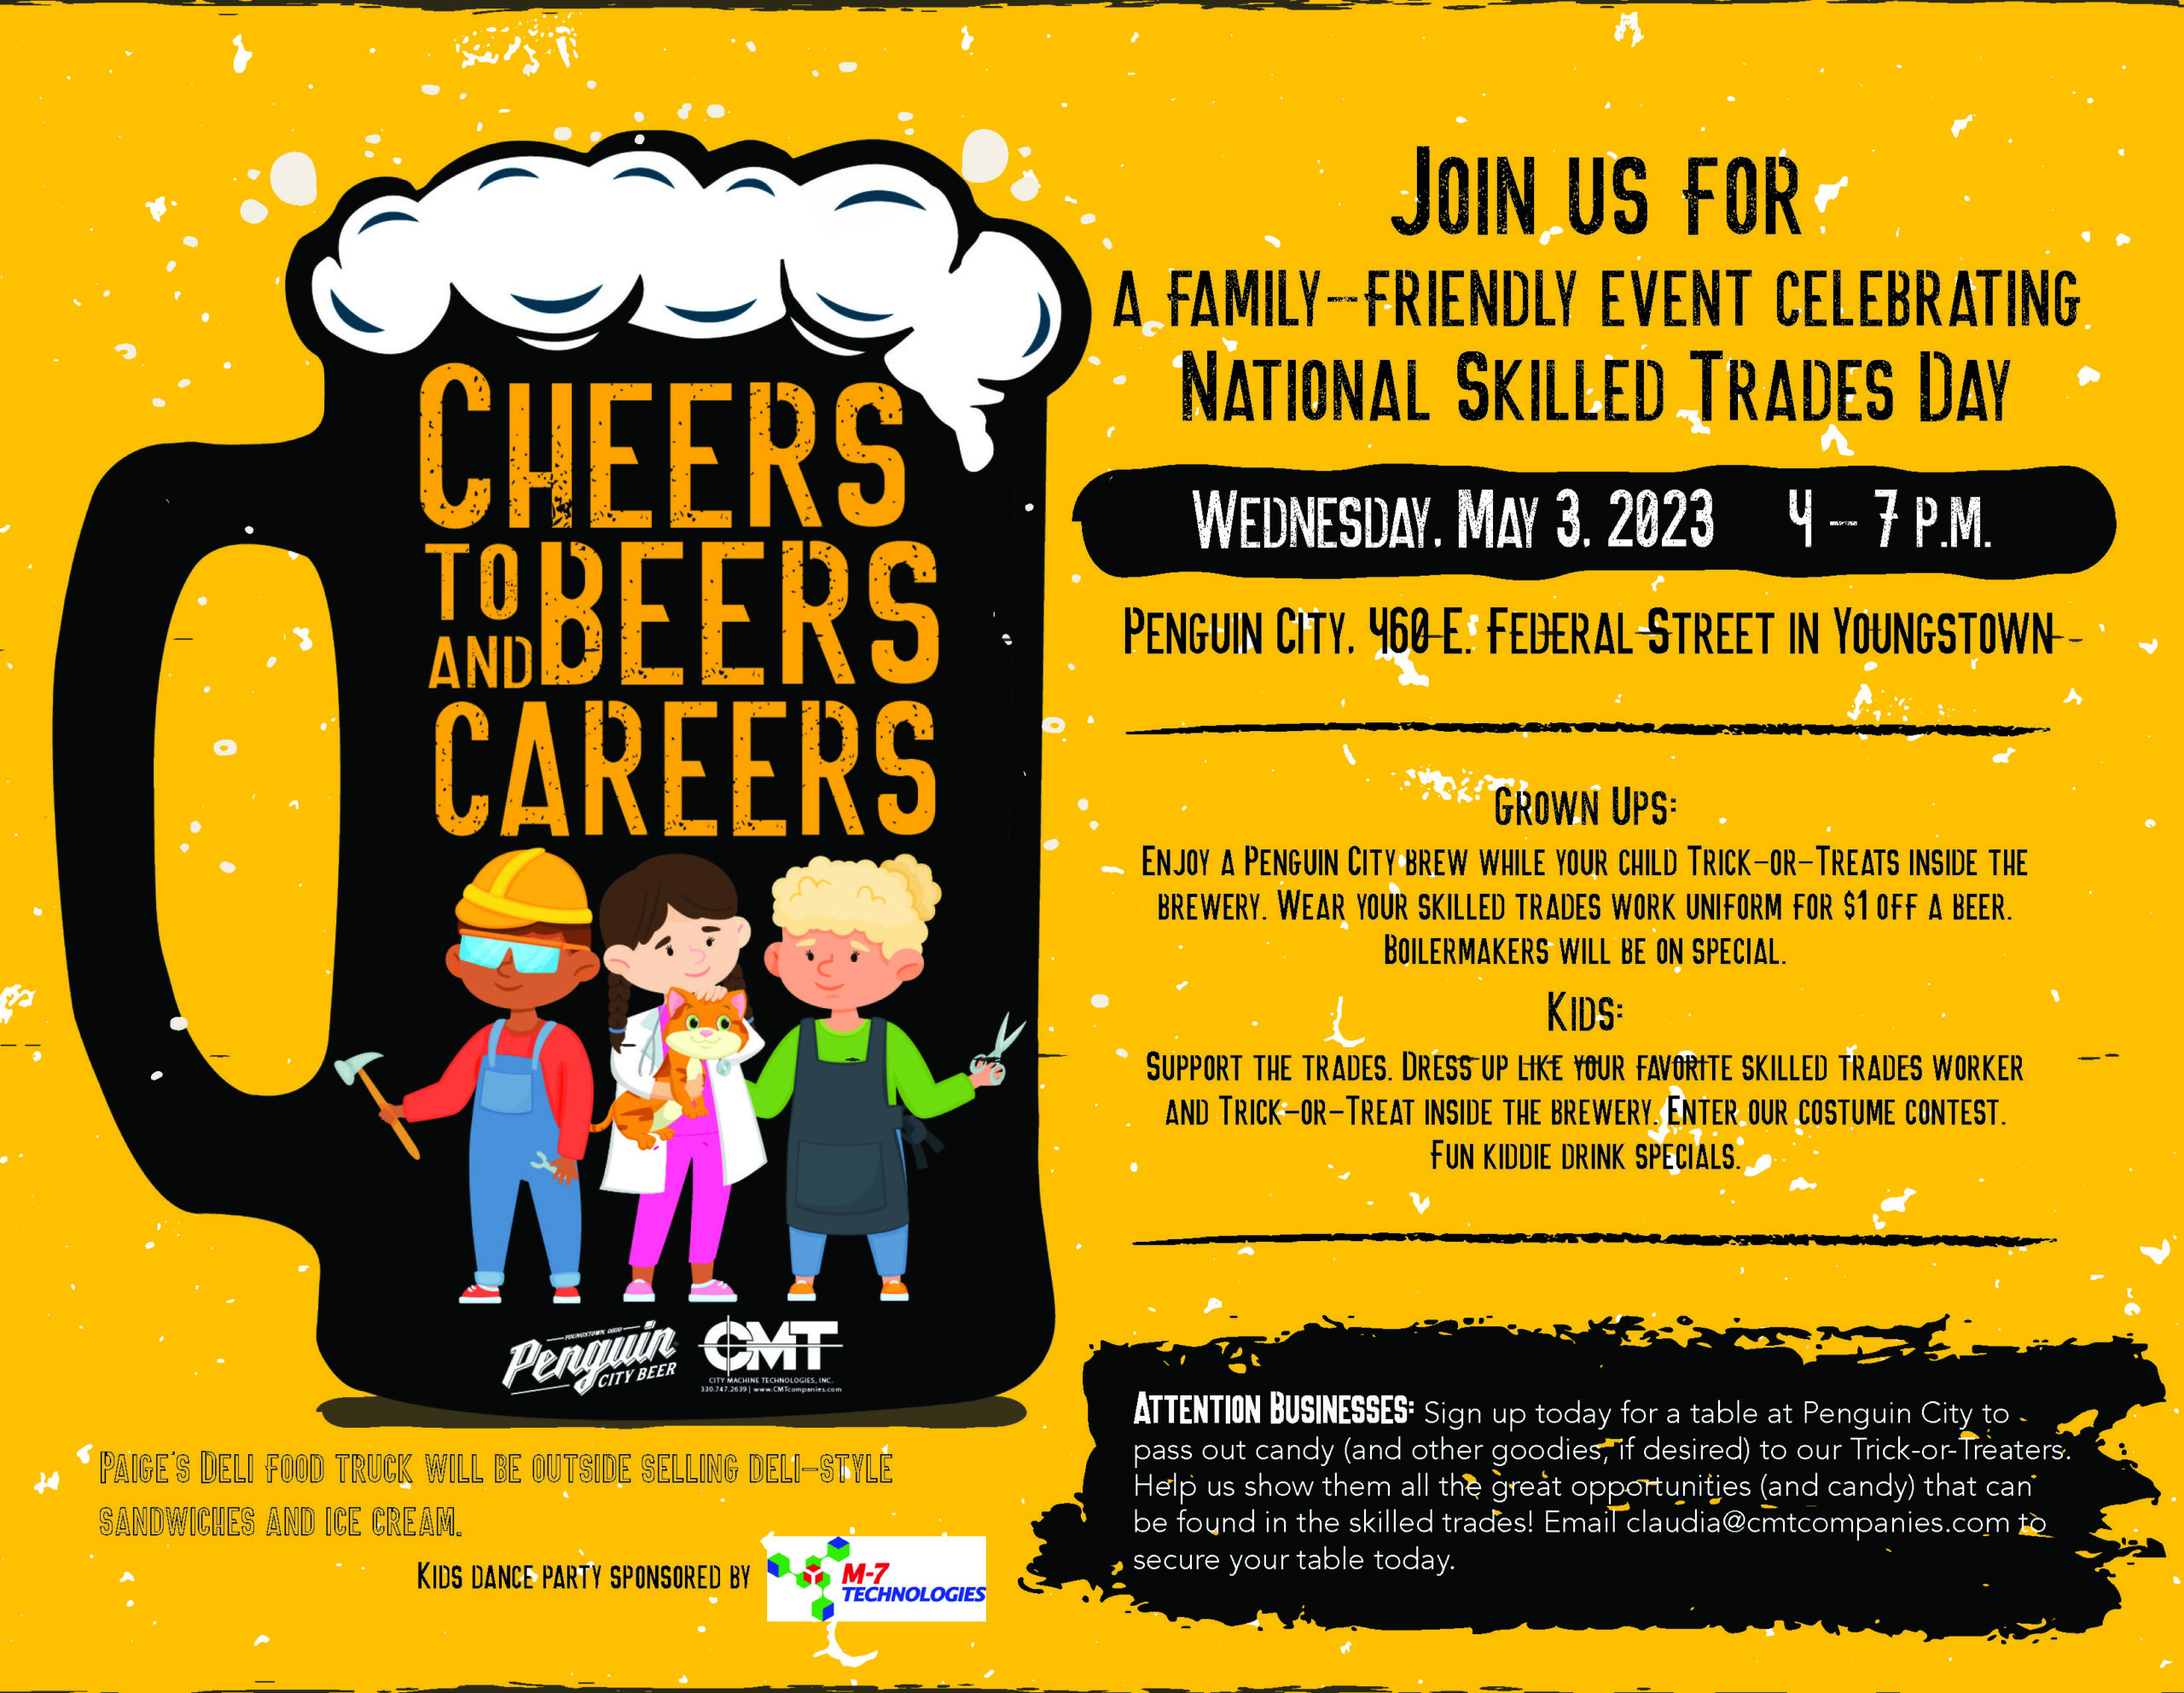 Cheers to Beers and Careers 5/3/23 - City Machine Technologies